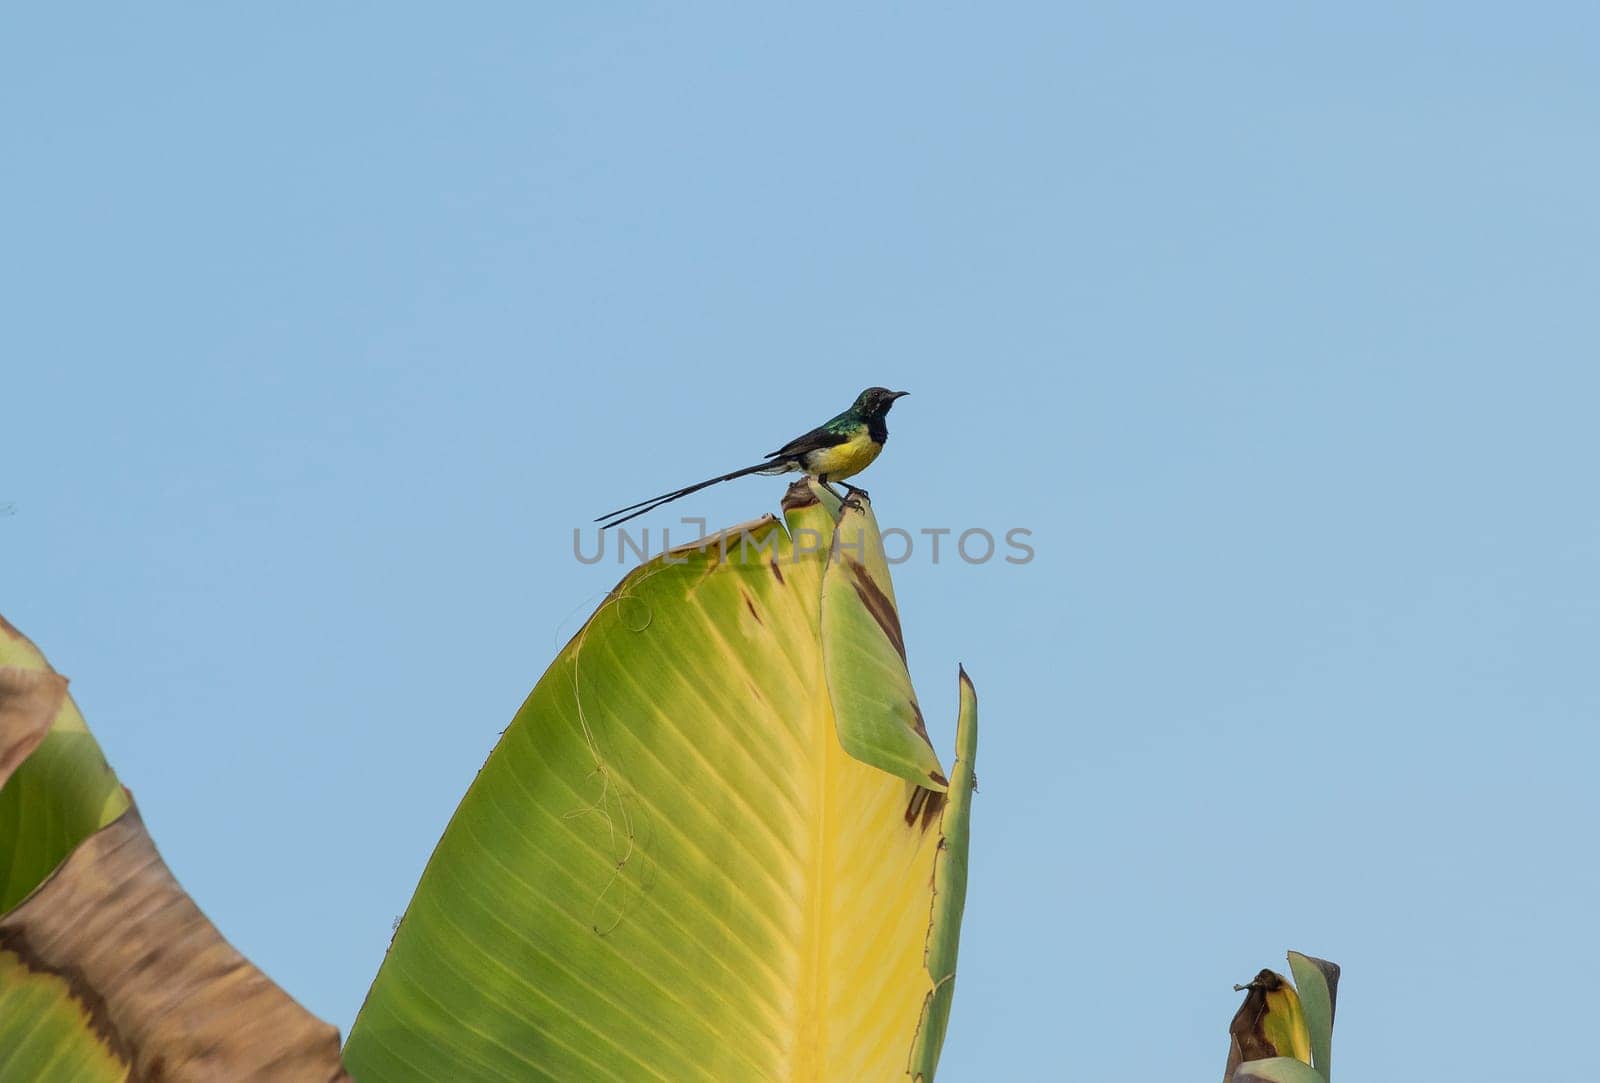 Nile Valley sunbird perched on large leaf by paulvinten